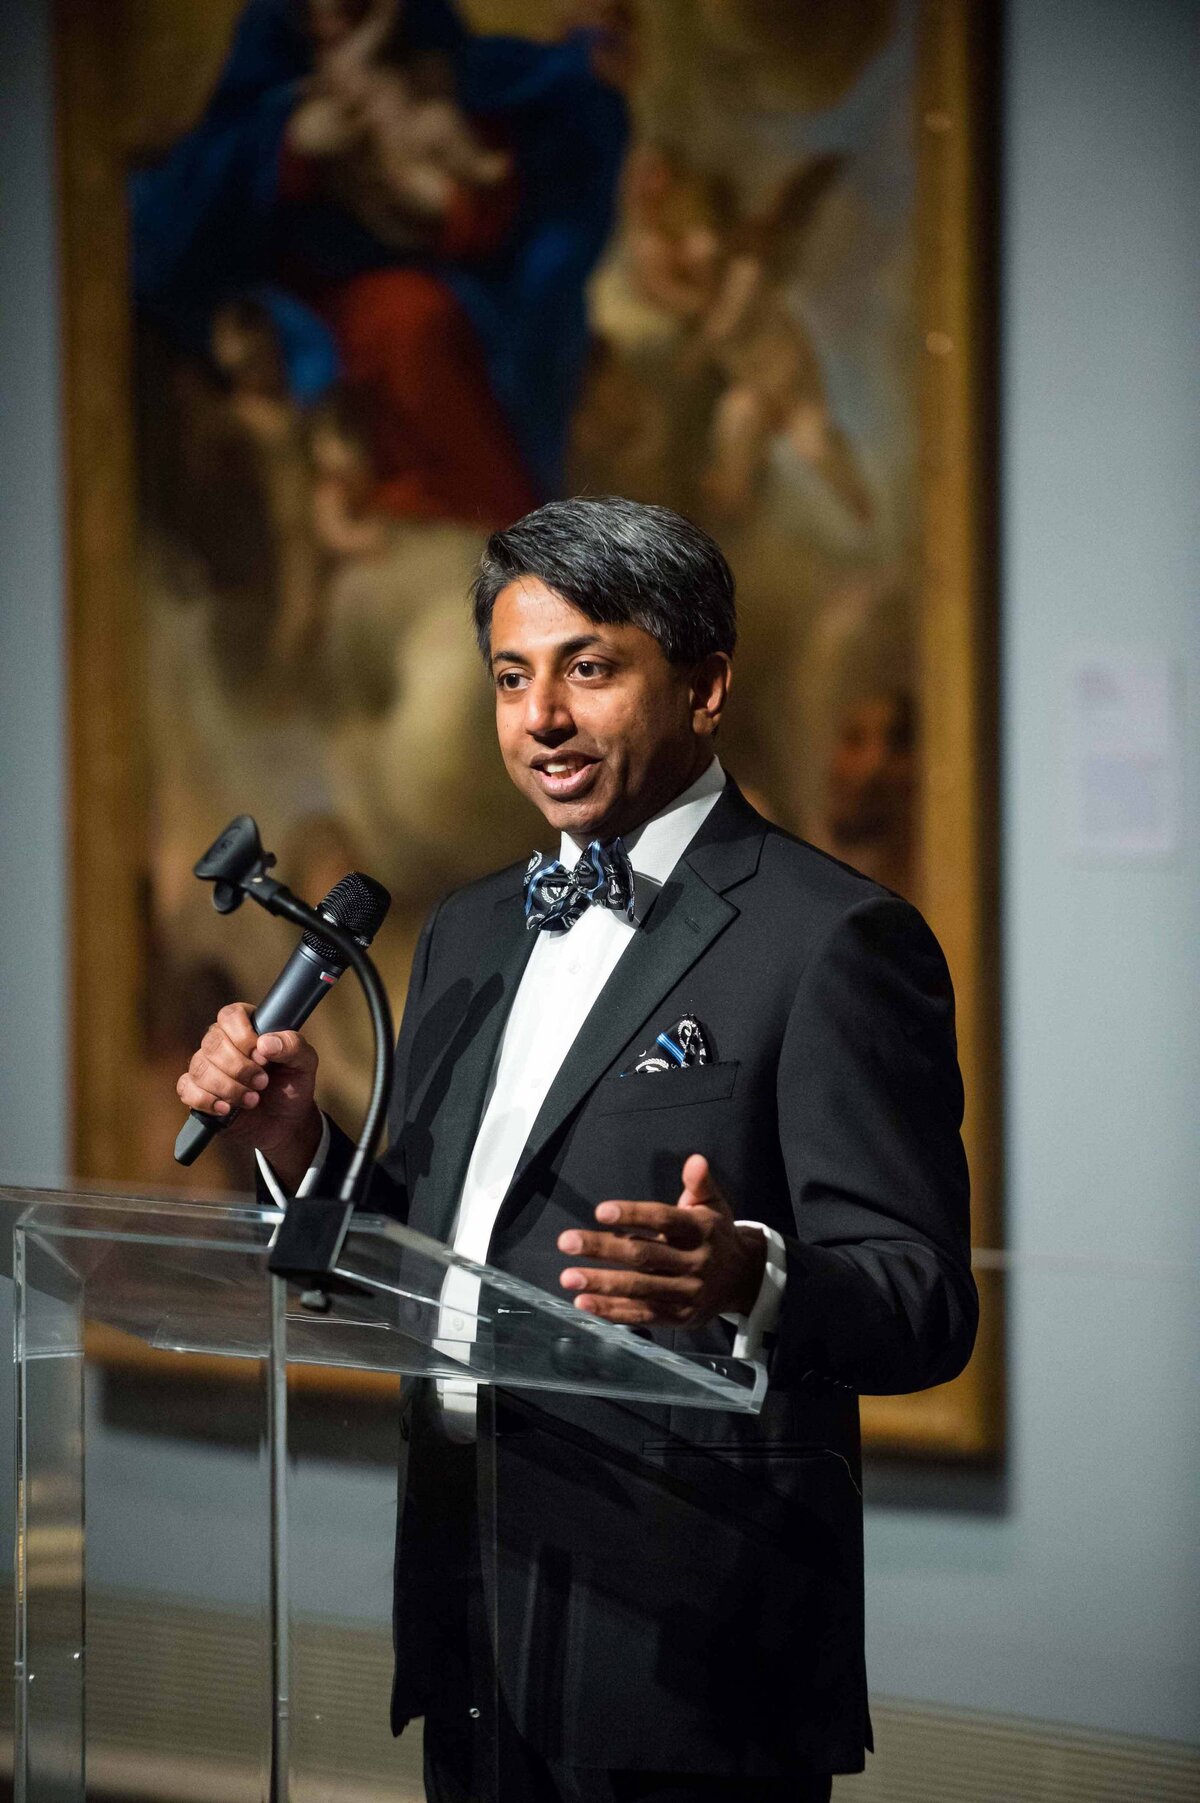 Ashwini D. Sharan speaks in Houston at the past presidents of the CNS dinner at the art museum